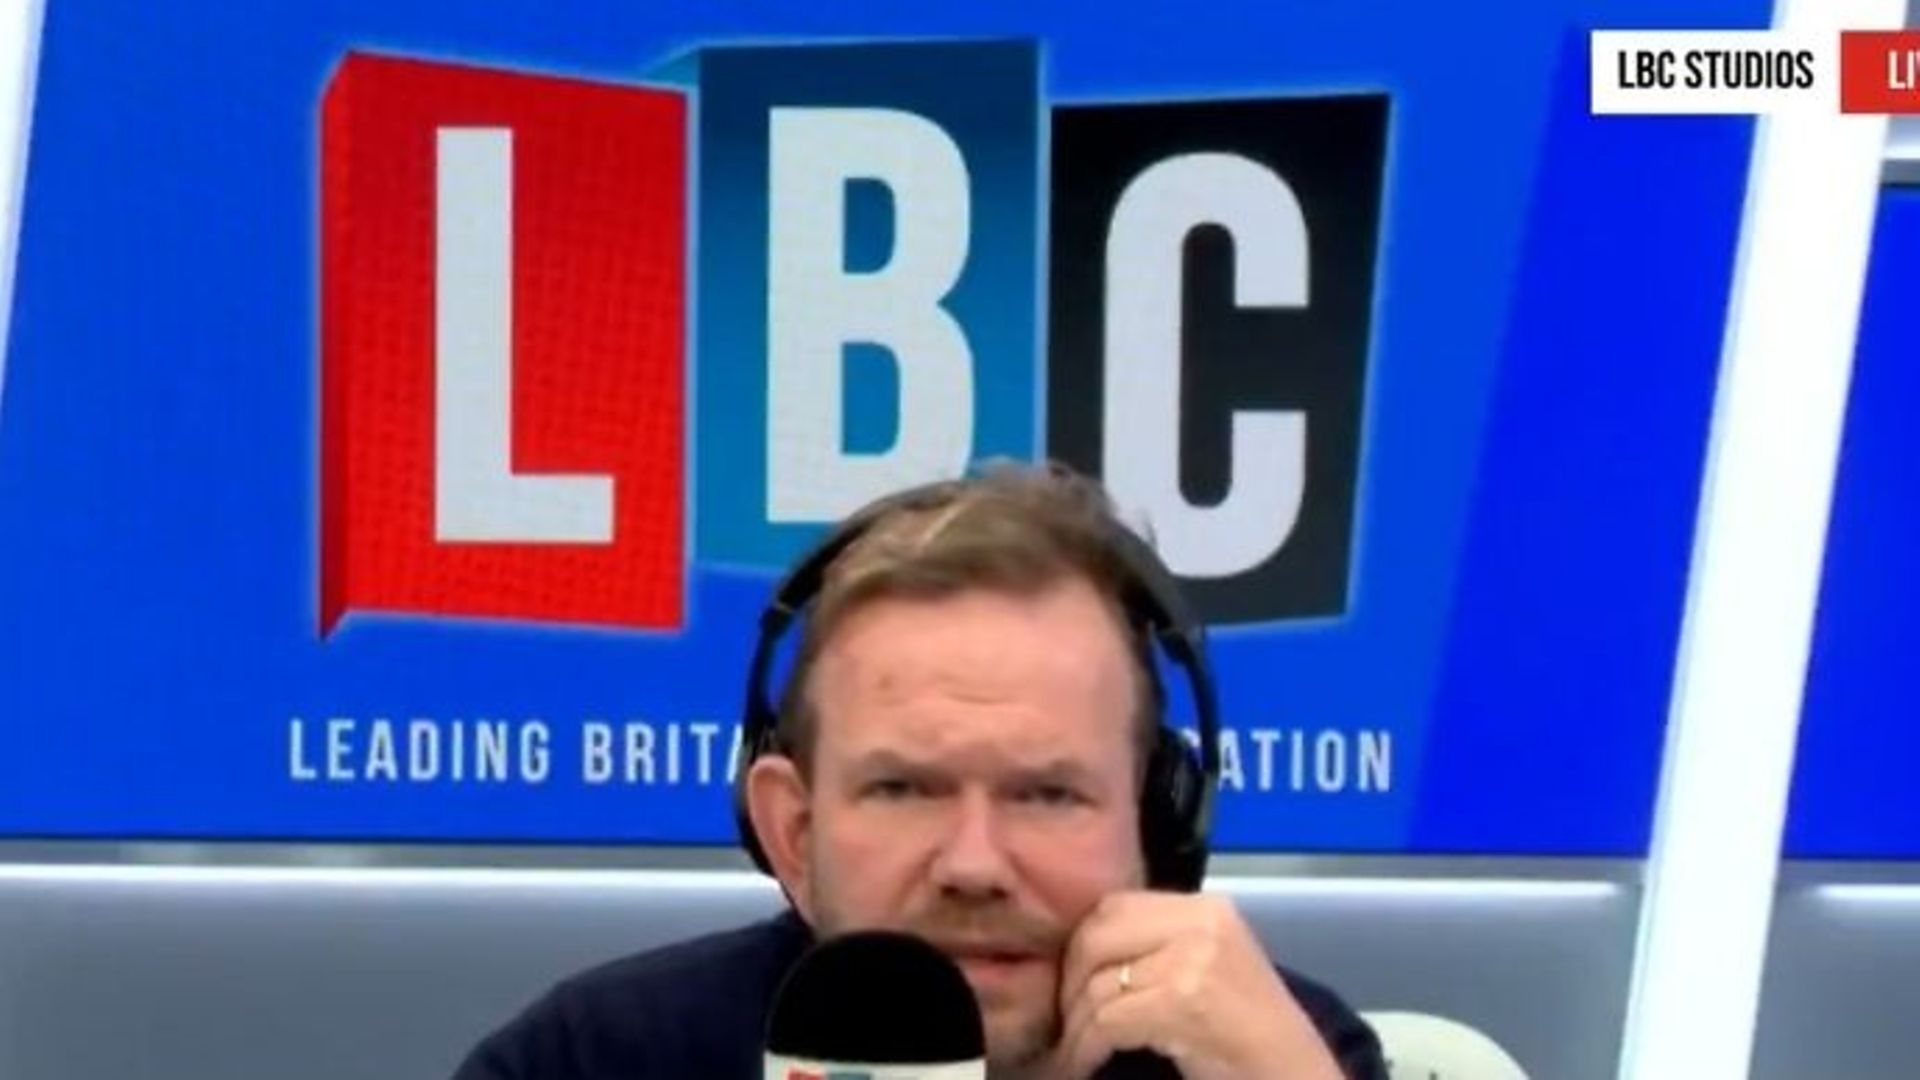 James O'Brien called Allison Pearson's comment 'pant-wettingly stupid' - Credit: LBC radio, Twitter